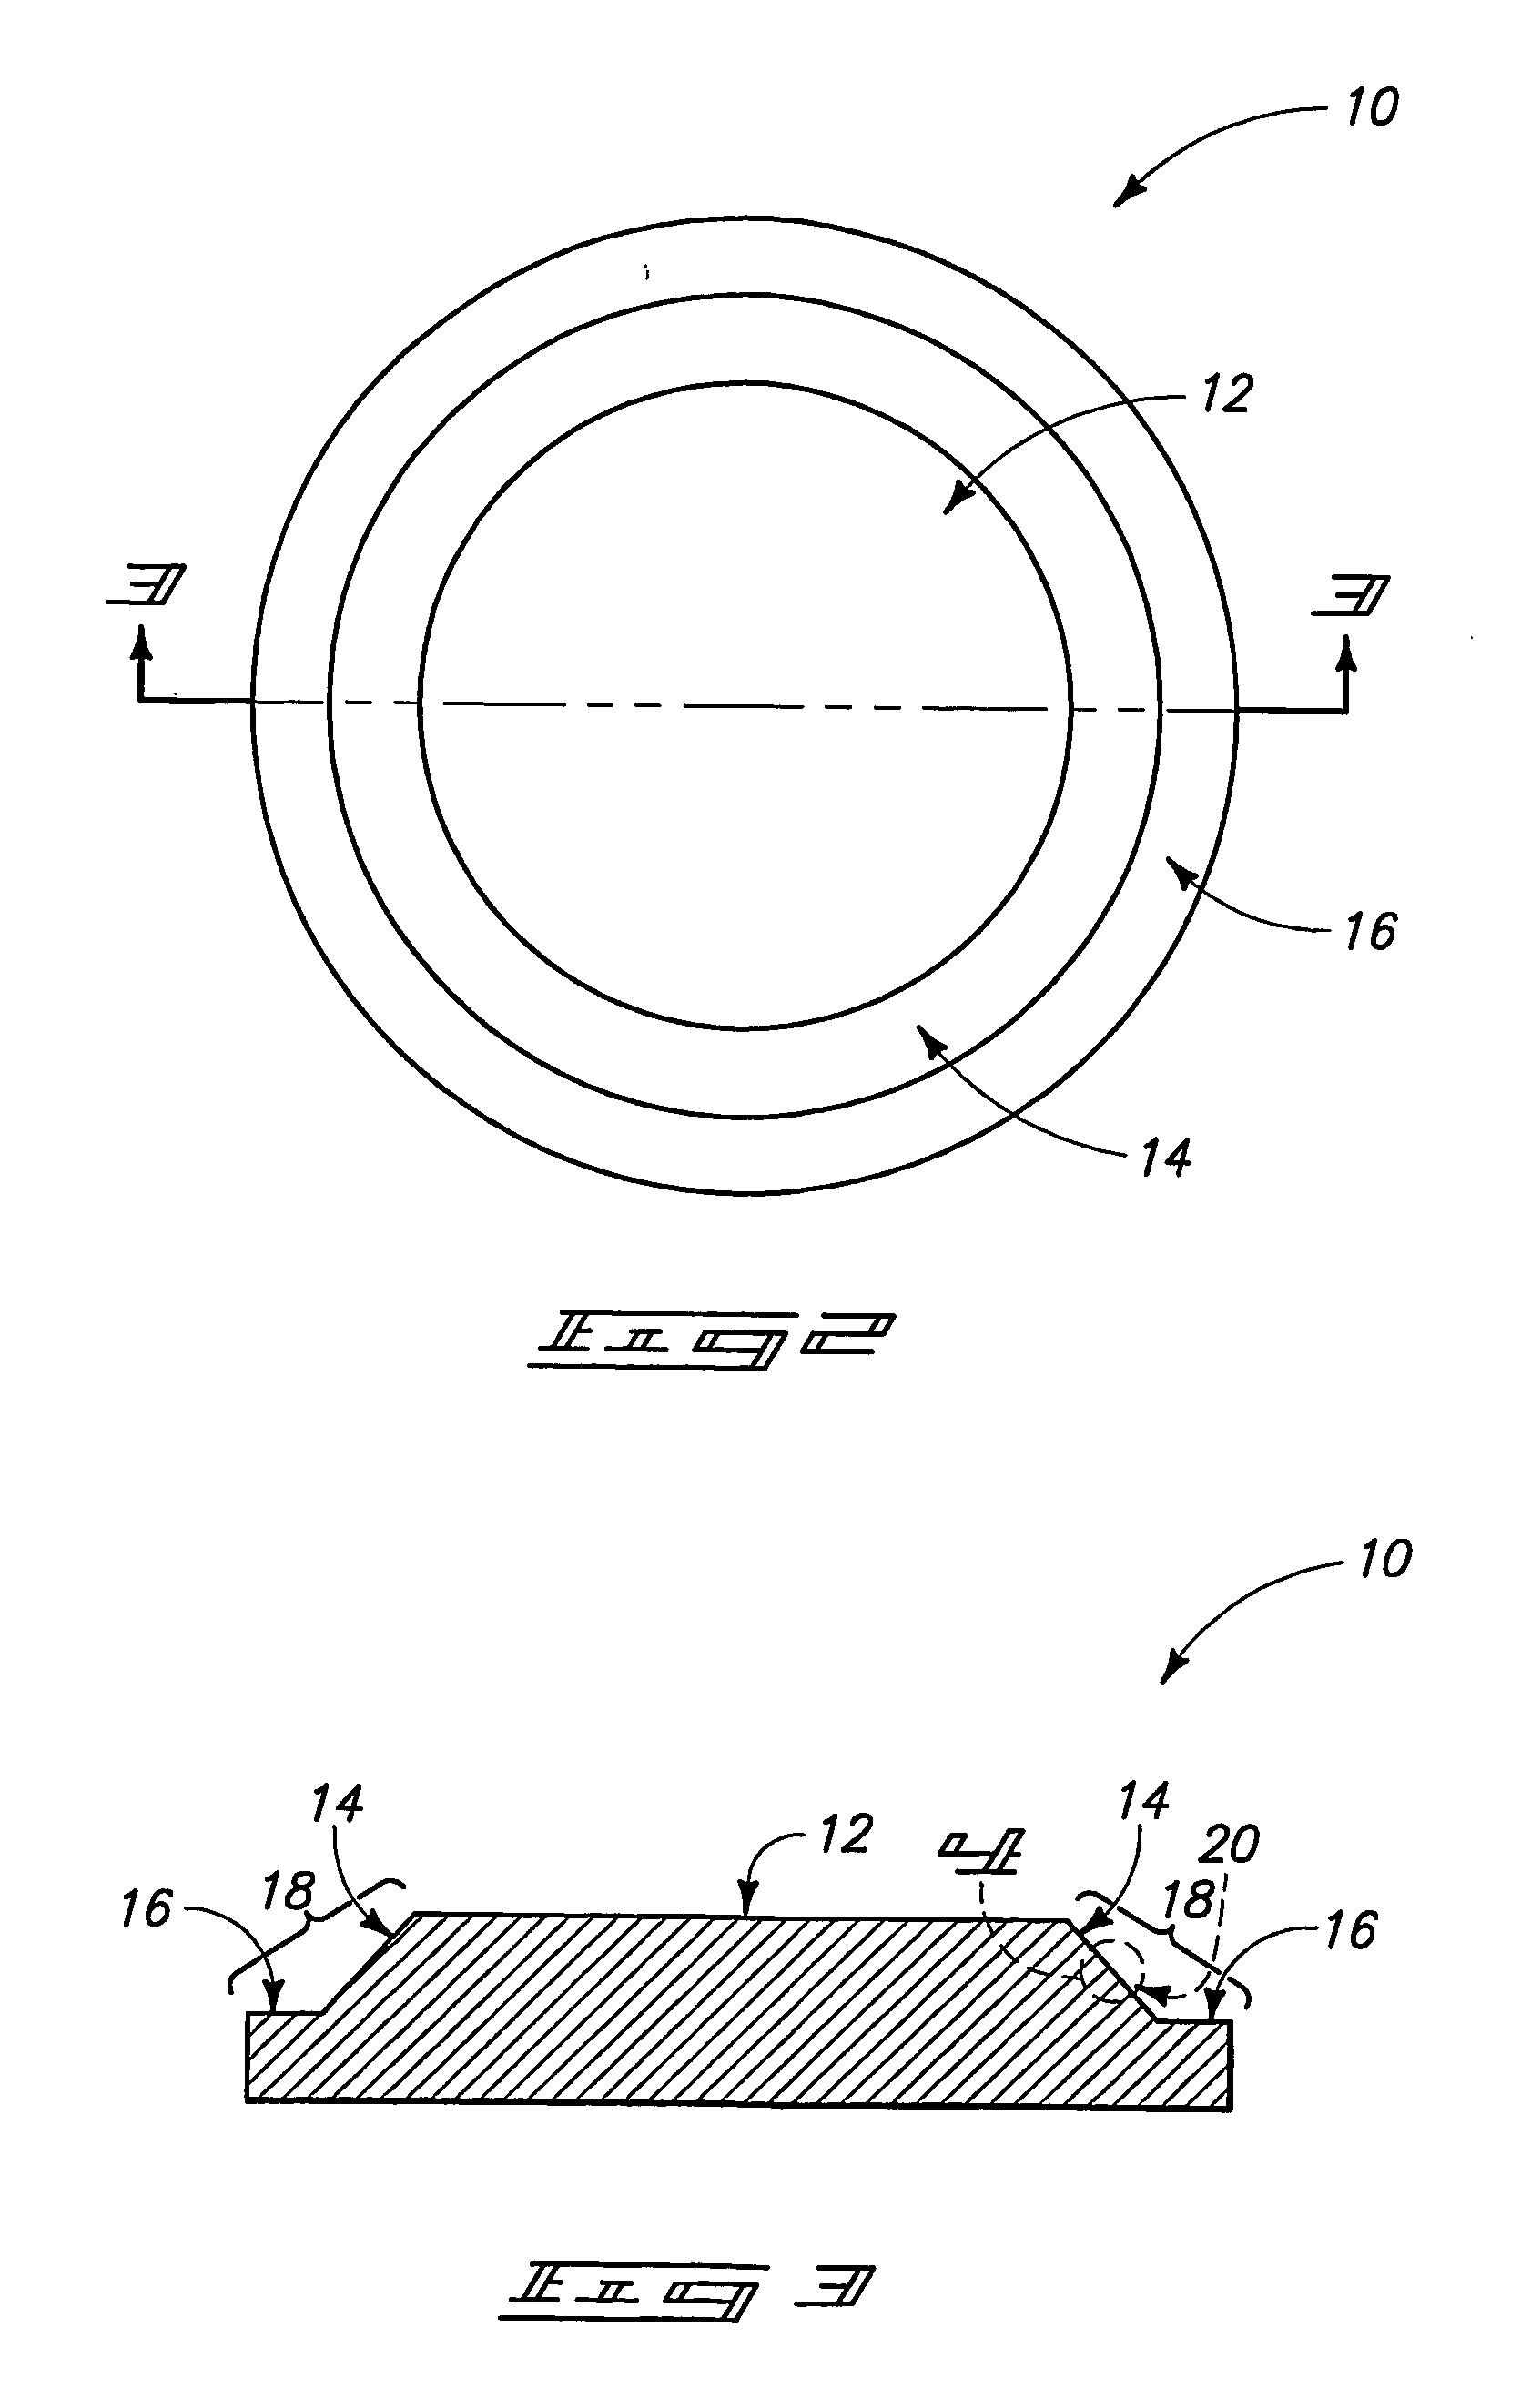 Methods of treating deposition process components to form particle traps, and deposition process components having particle traps thereon